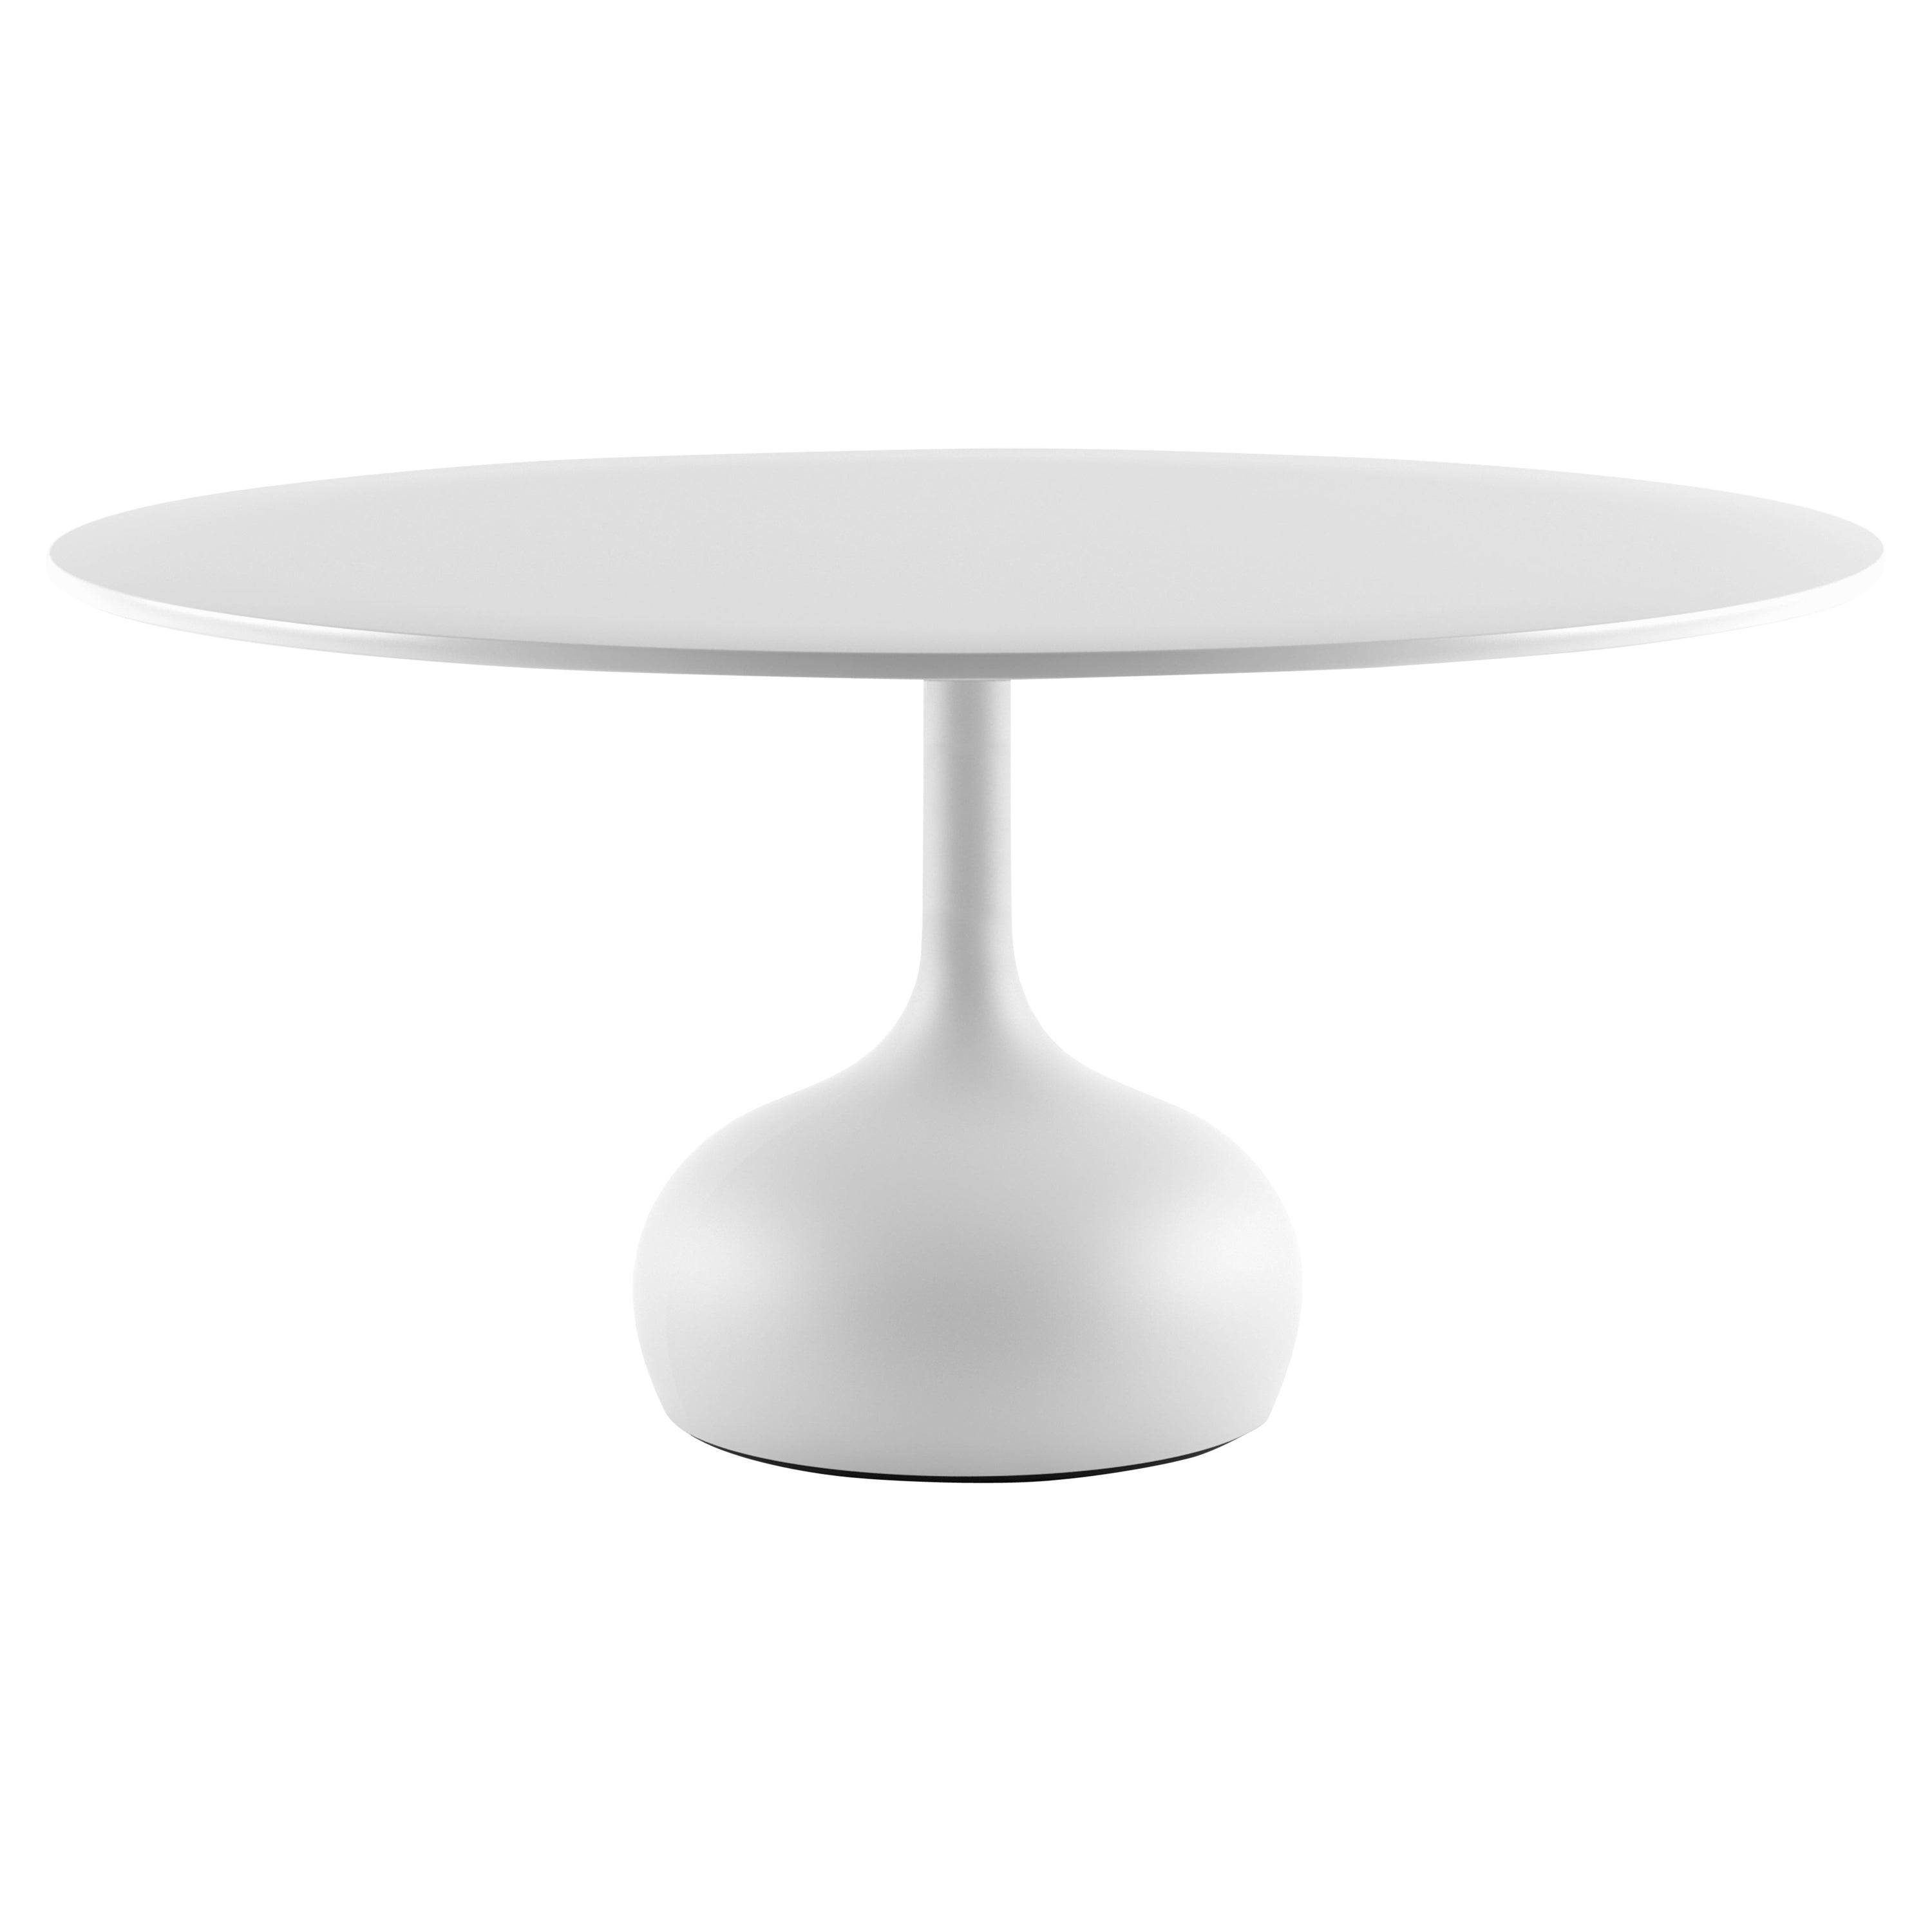 Alias 011 Saen Table Ø160 in White Lacquered MDF Top by Gabriele e Oscar Buratti For Sale